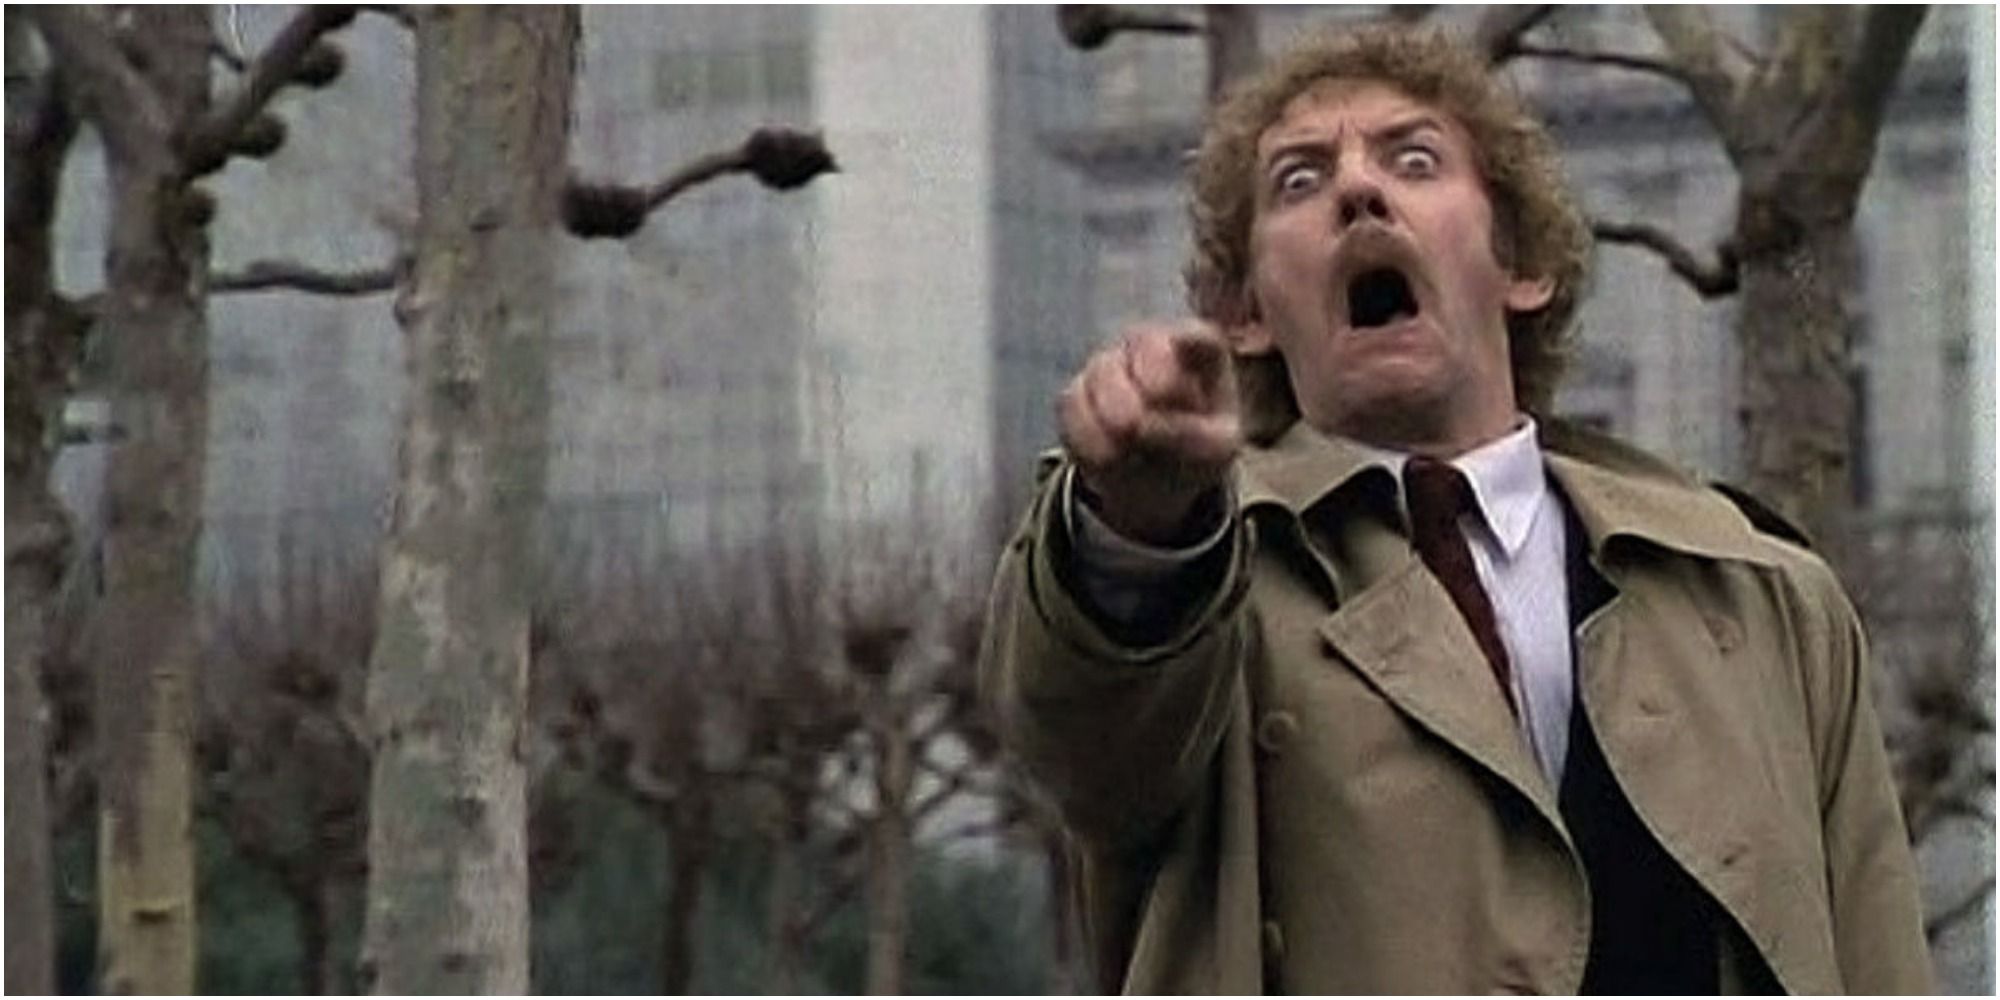 The doctor gets infected in Invasion Of The Body Snatchers